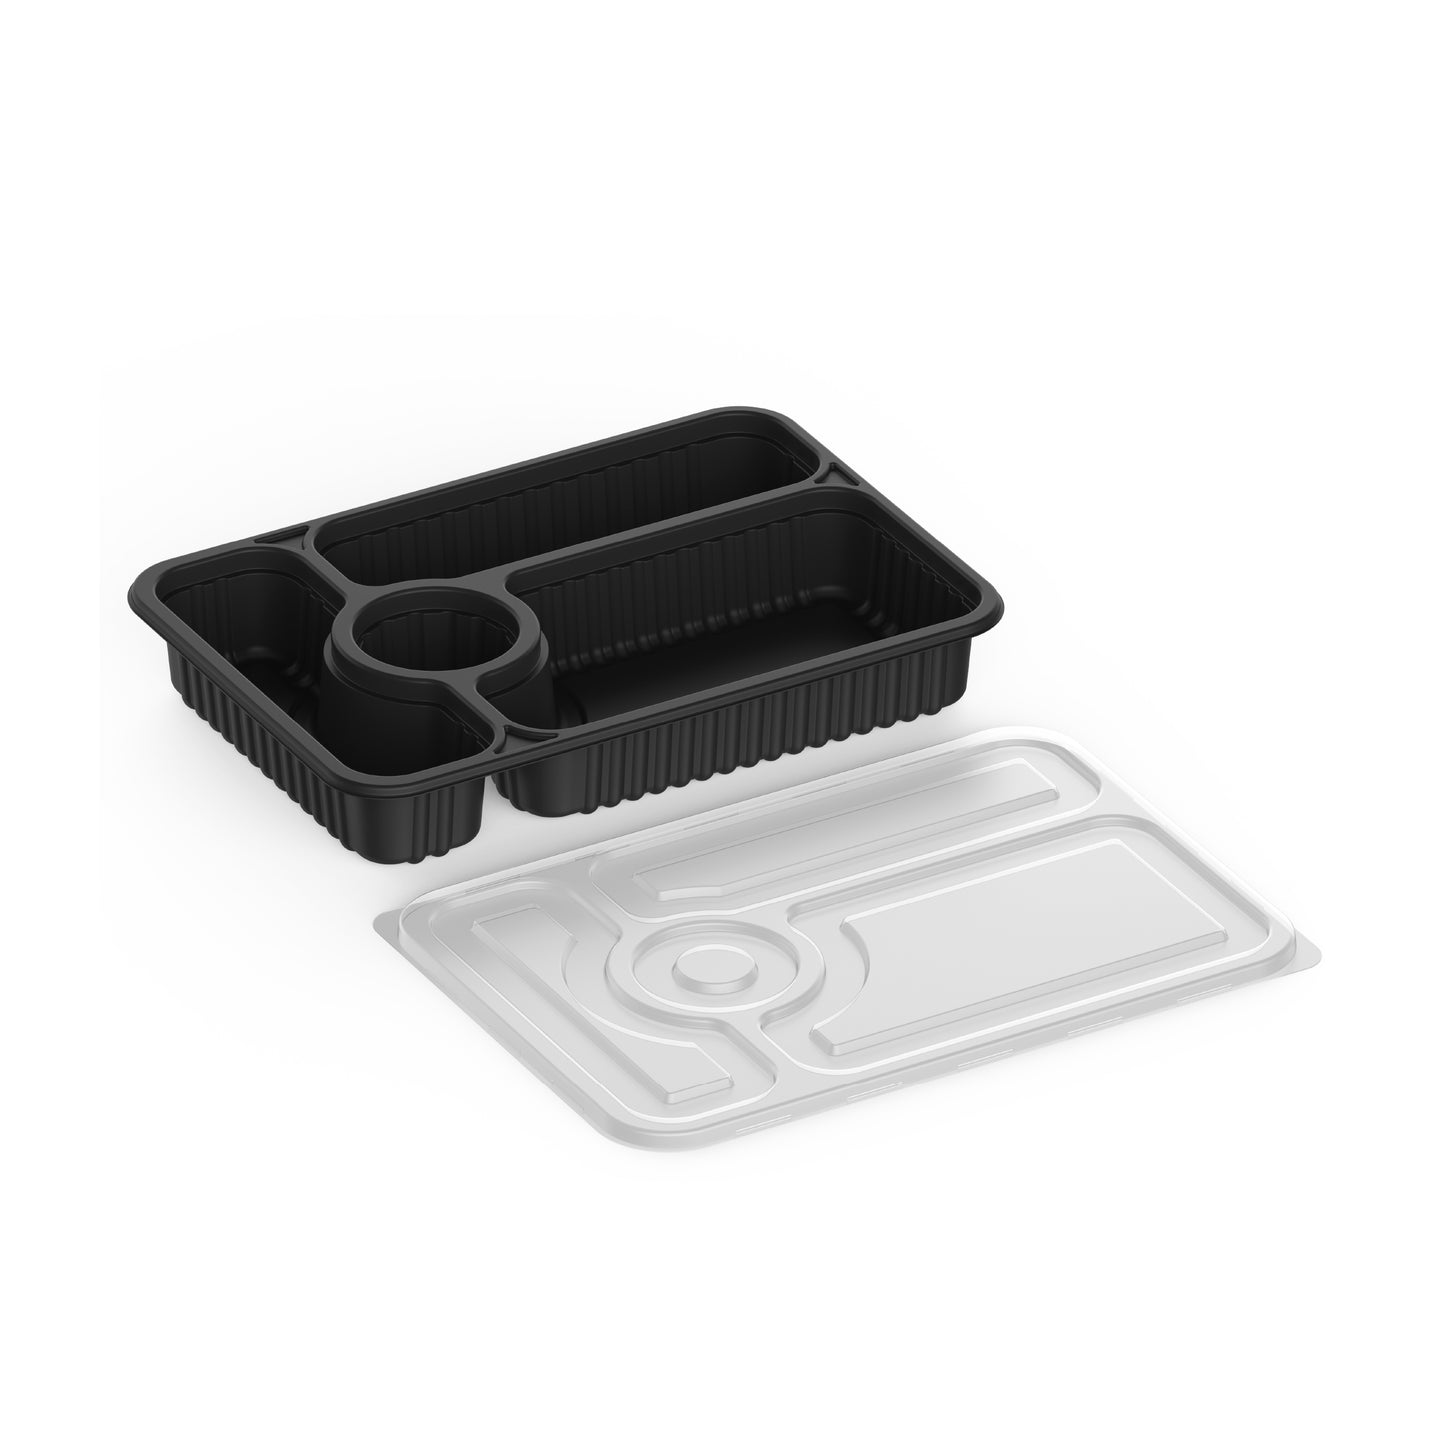 4 Compartments Pack of 10 Black Meal Containers with Clear Lids